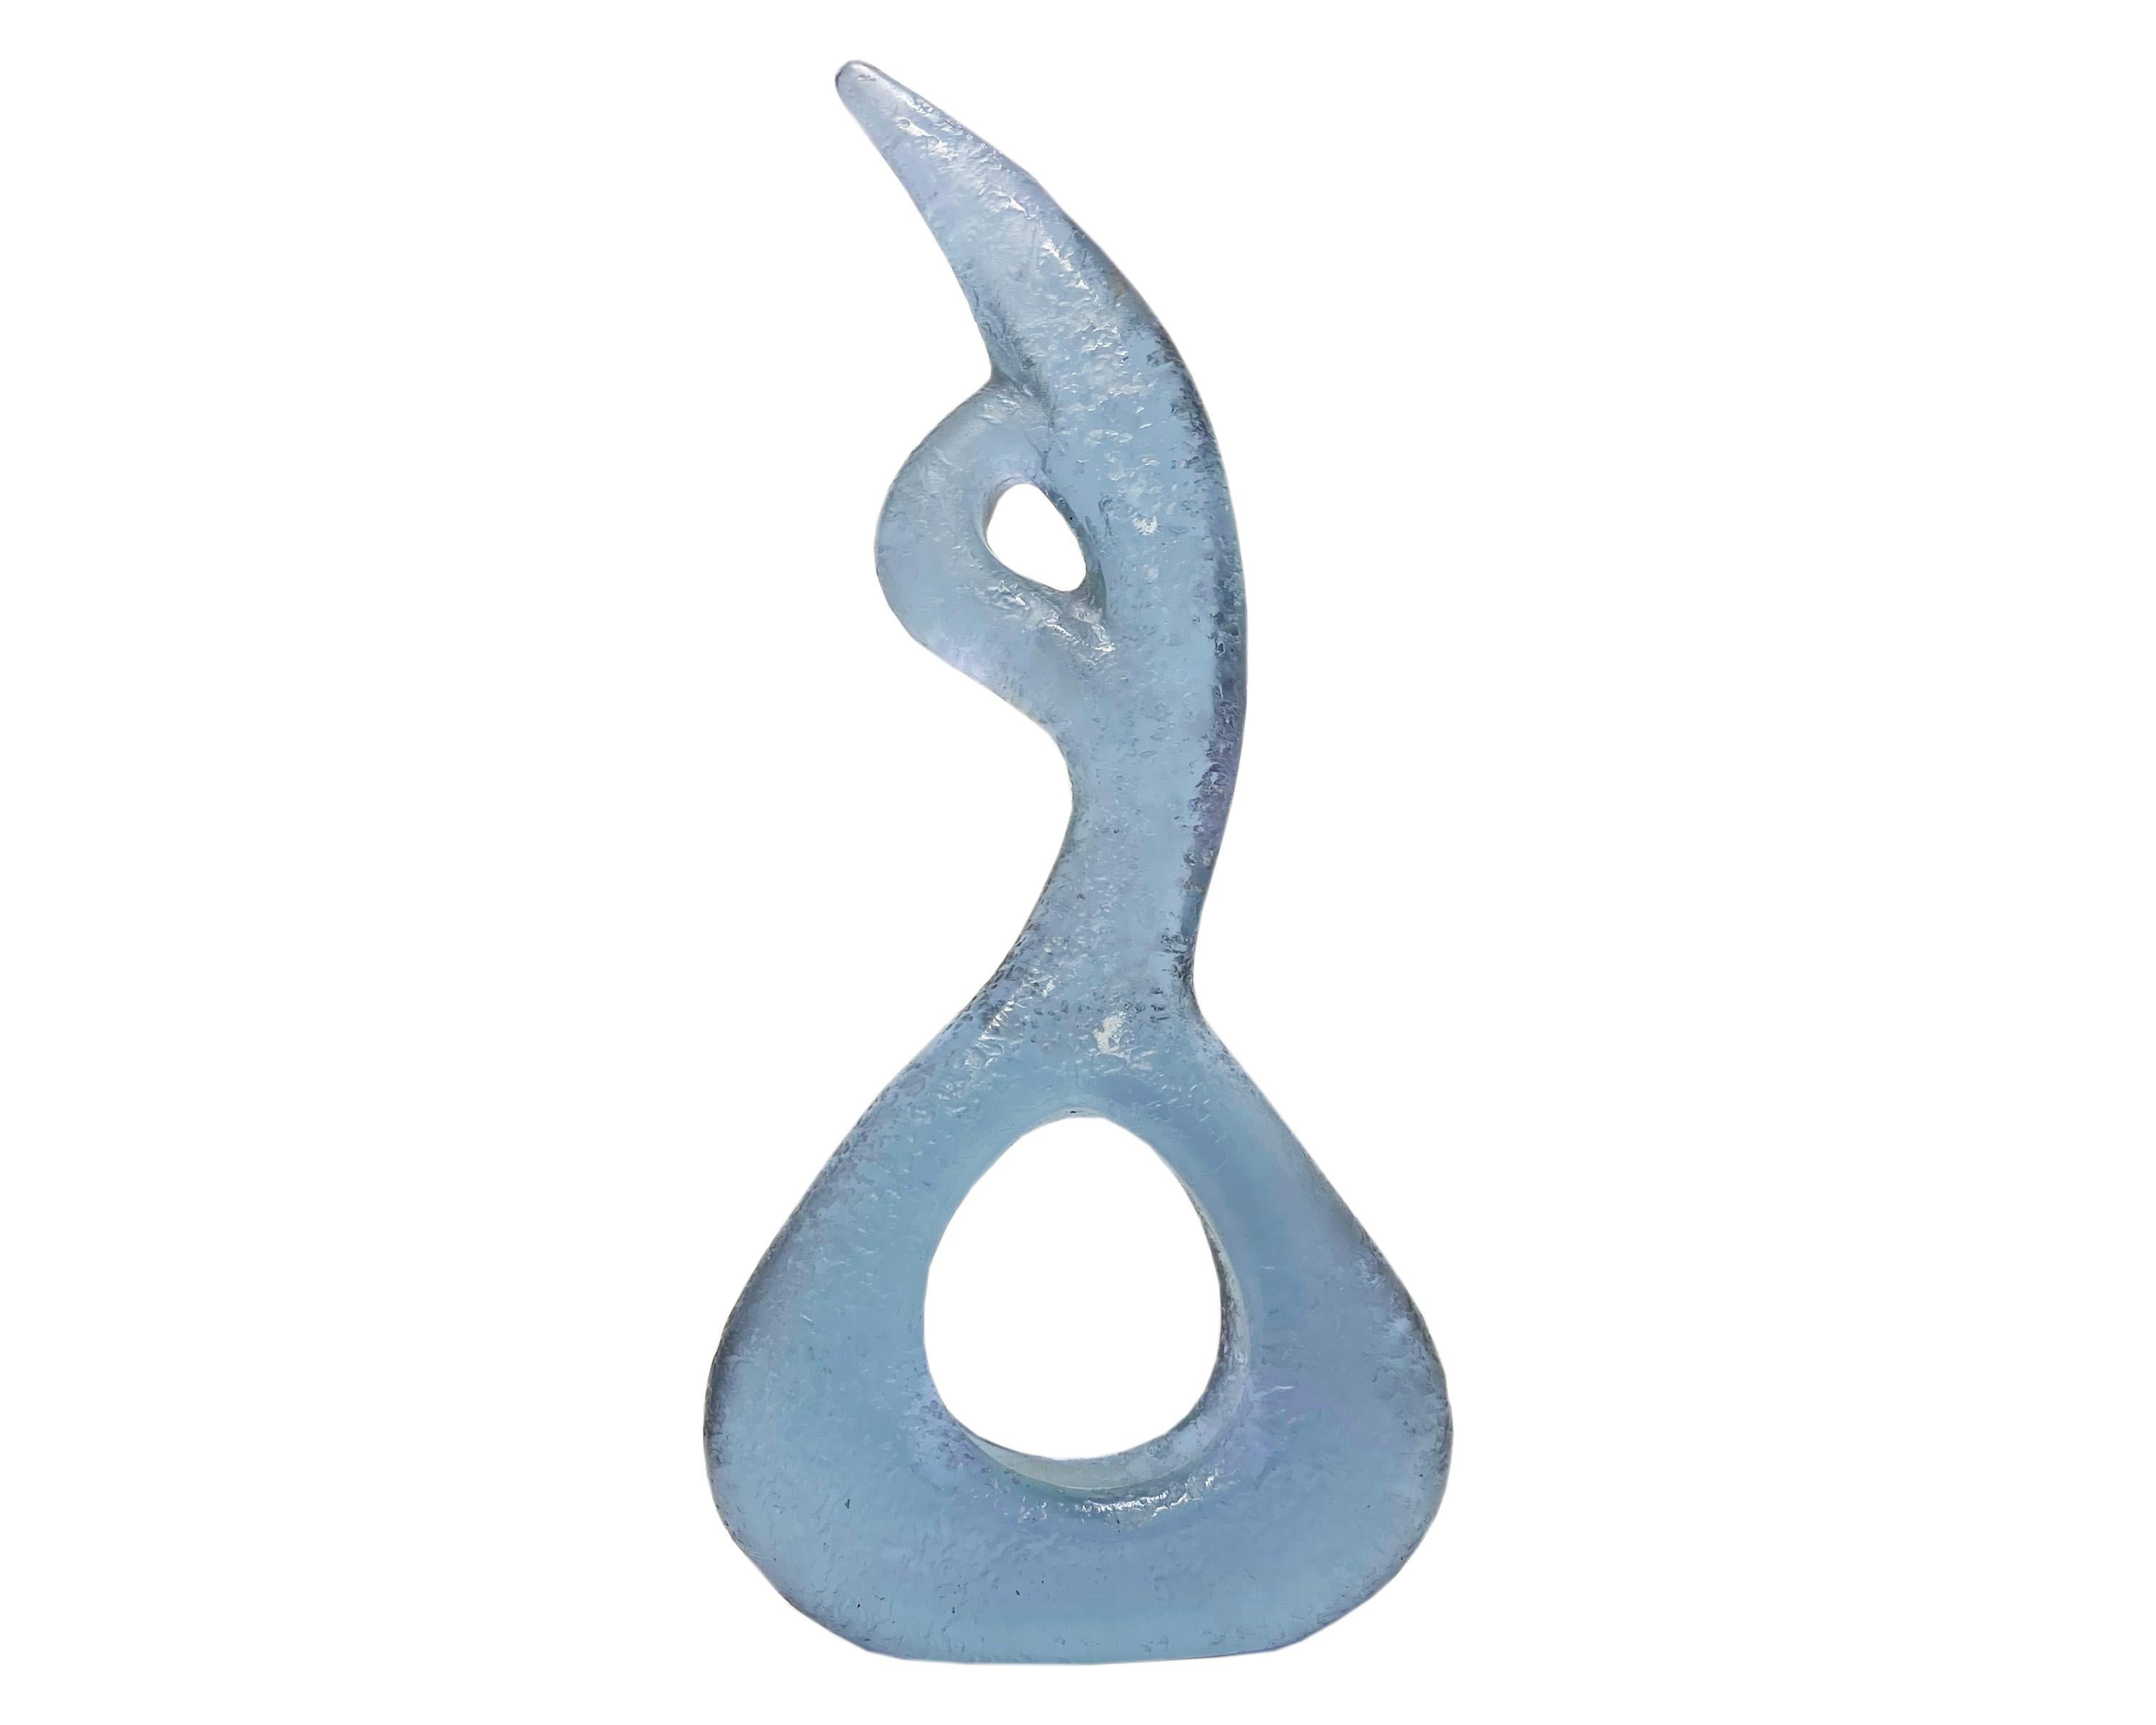 A substantial Murano art glass sculpture in Alexandrite glass by Italian glass artist Livio Seguso (born 1930). Made in Italy, the sculpture features a textured finished and displays as both a transparent aquamarine and amethyst hue depending on the